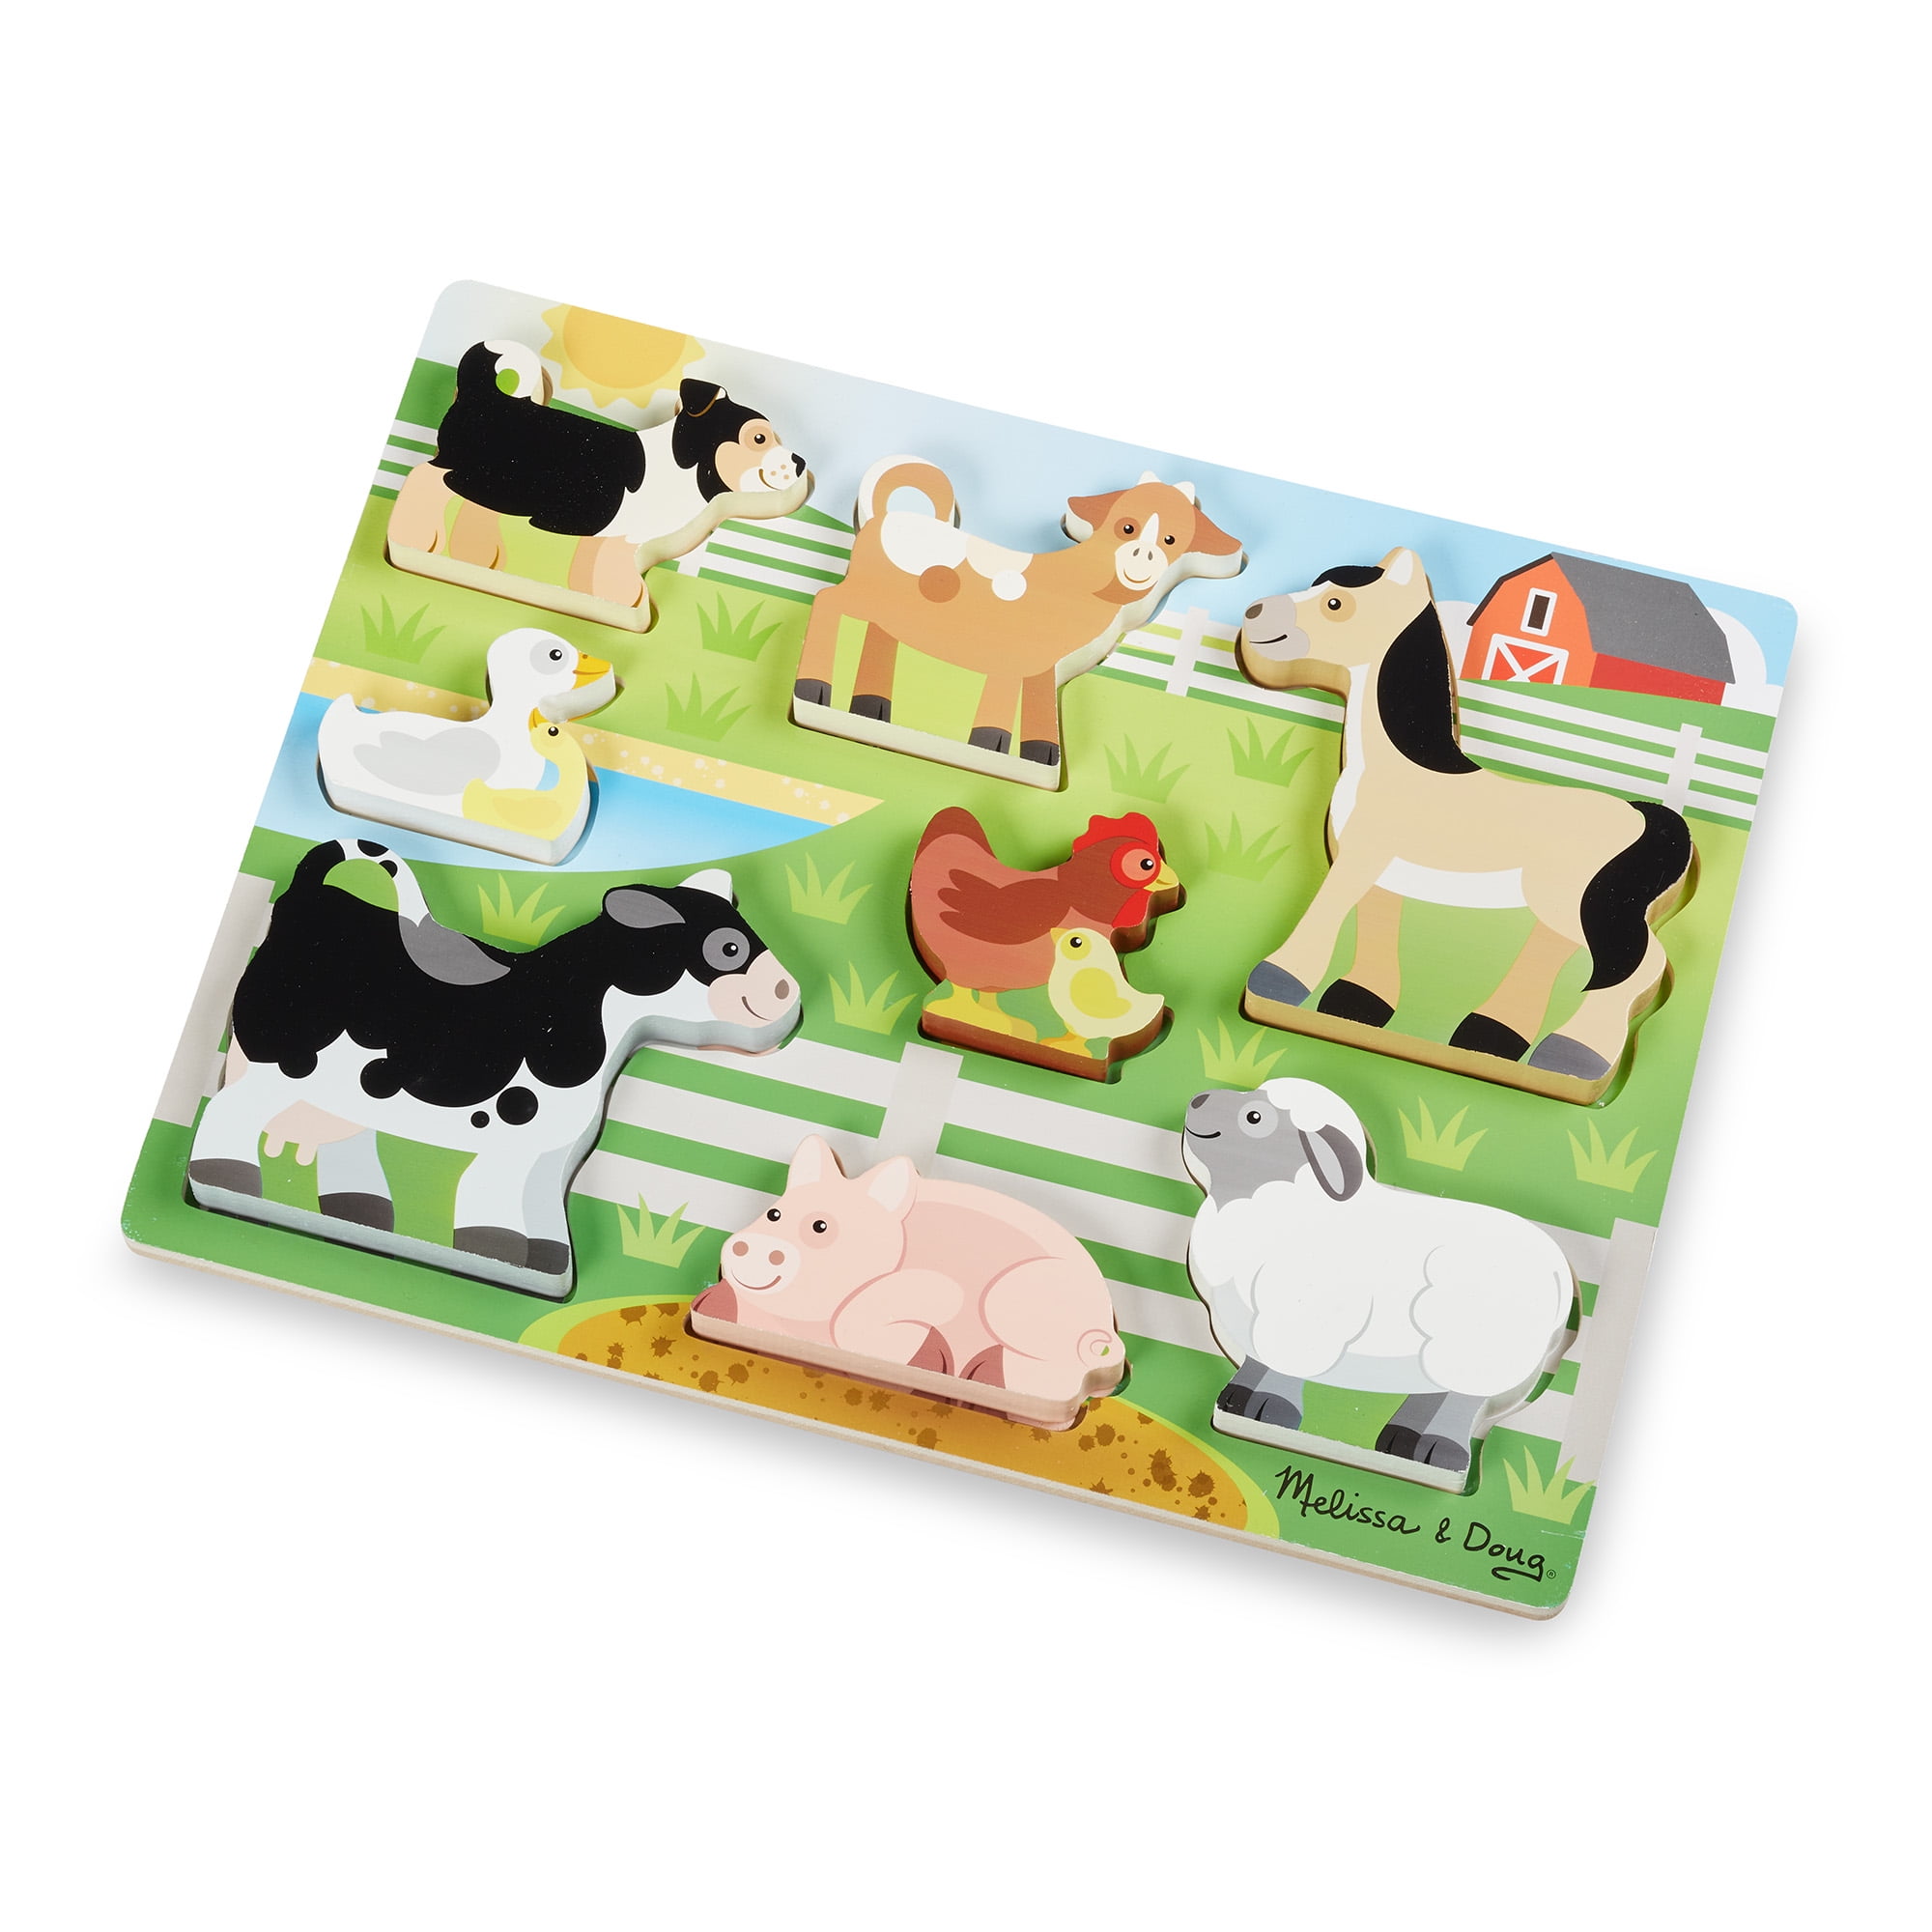 NEW CHILDRENS WOODEN FARM ANIMAL JIGSAW PEG PUZZLE COW SHEEP PIG HORSE 8pc WW 13 